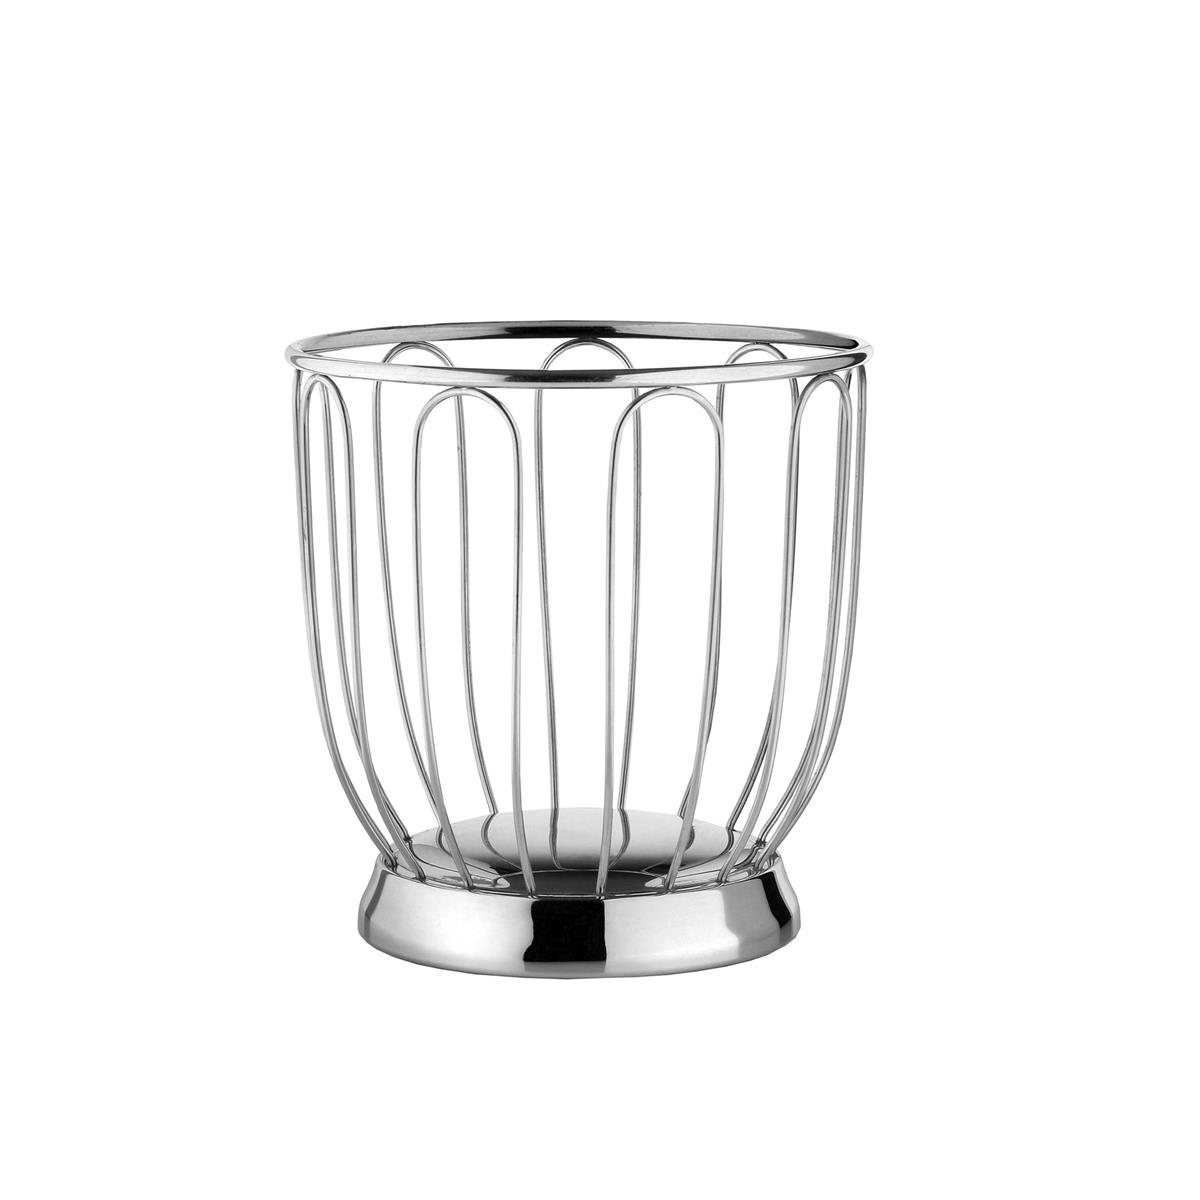 photo citrus fruit holder in polished 18/10 stainless steel